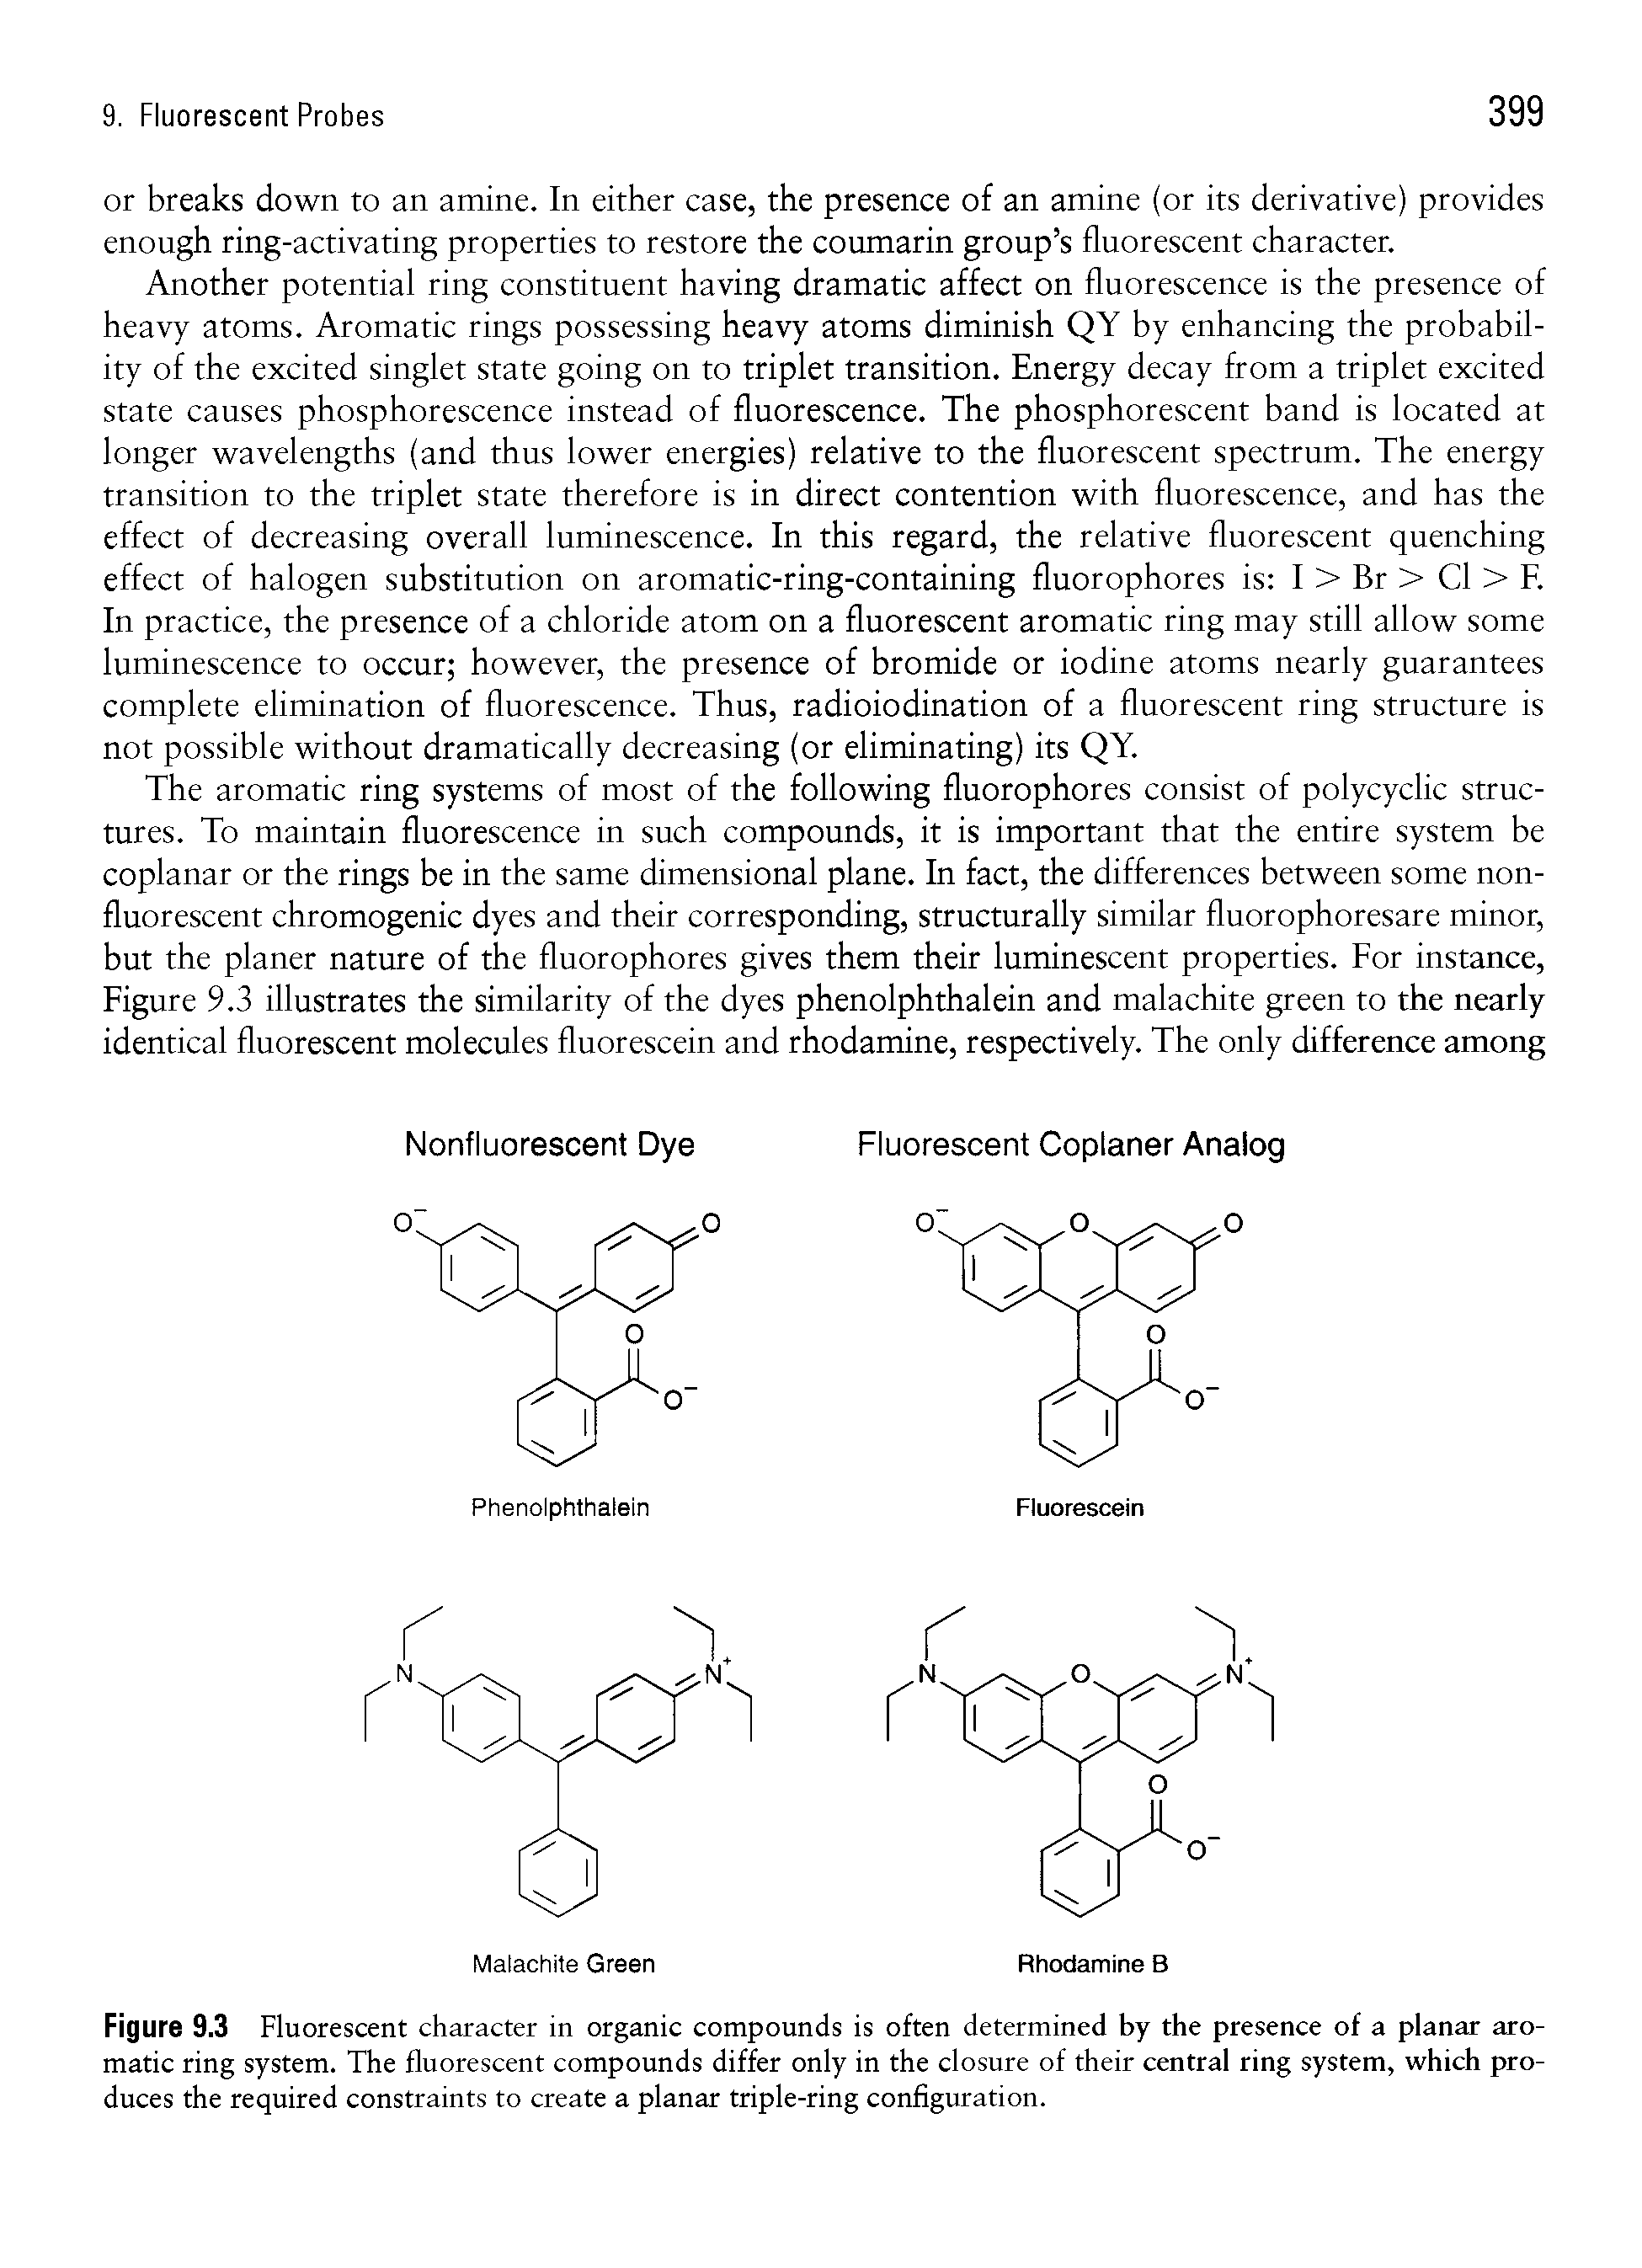 Figure 9.3 Fluorescent character in organic compounds is often determined by the presence of a planar aromatic ring system. The fluorescent compounds differ only in the closure of their central ring system, which produces the required constraints to create a planar triple-ring configuration.